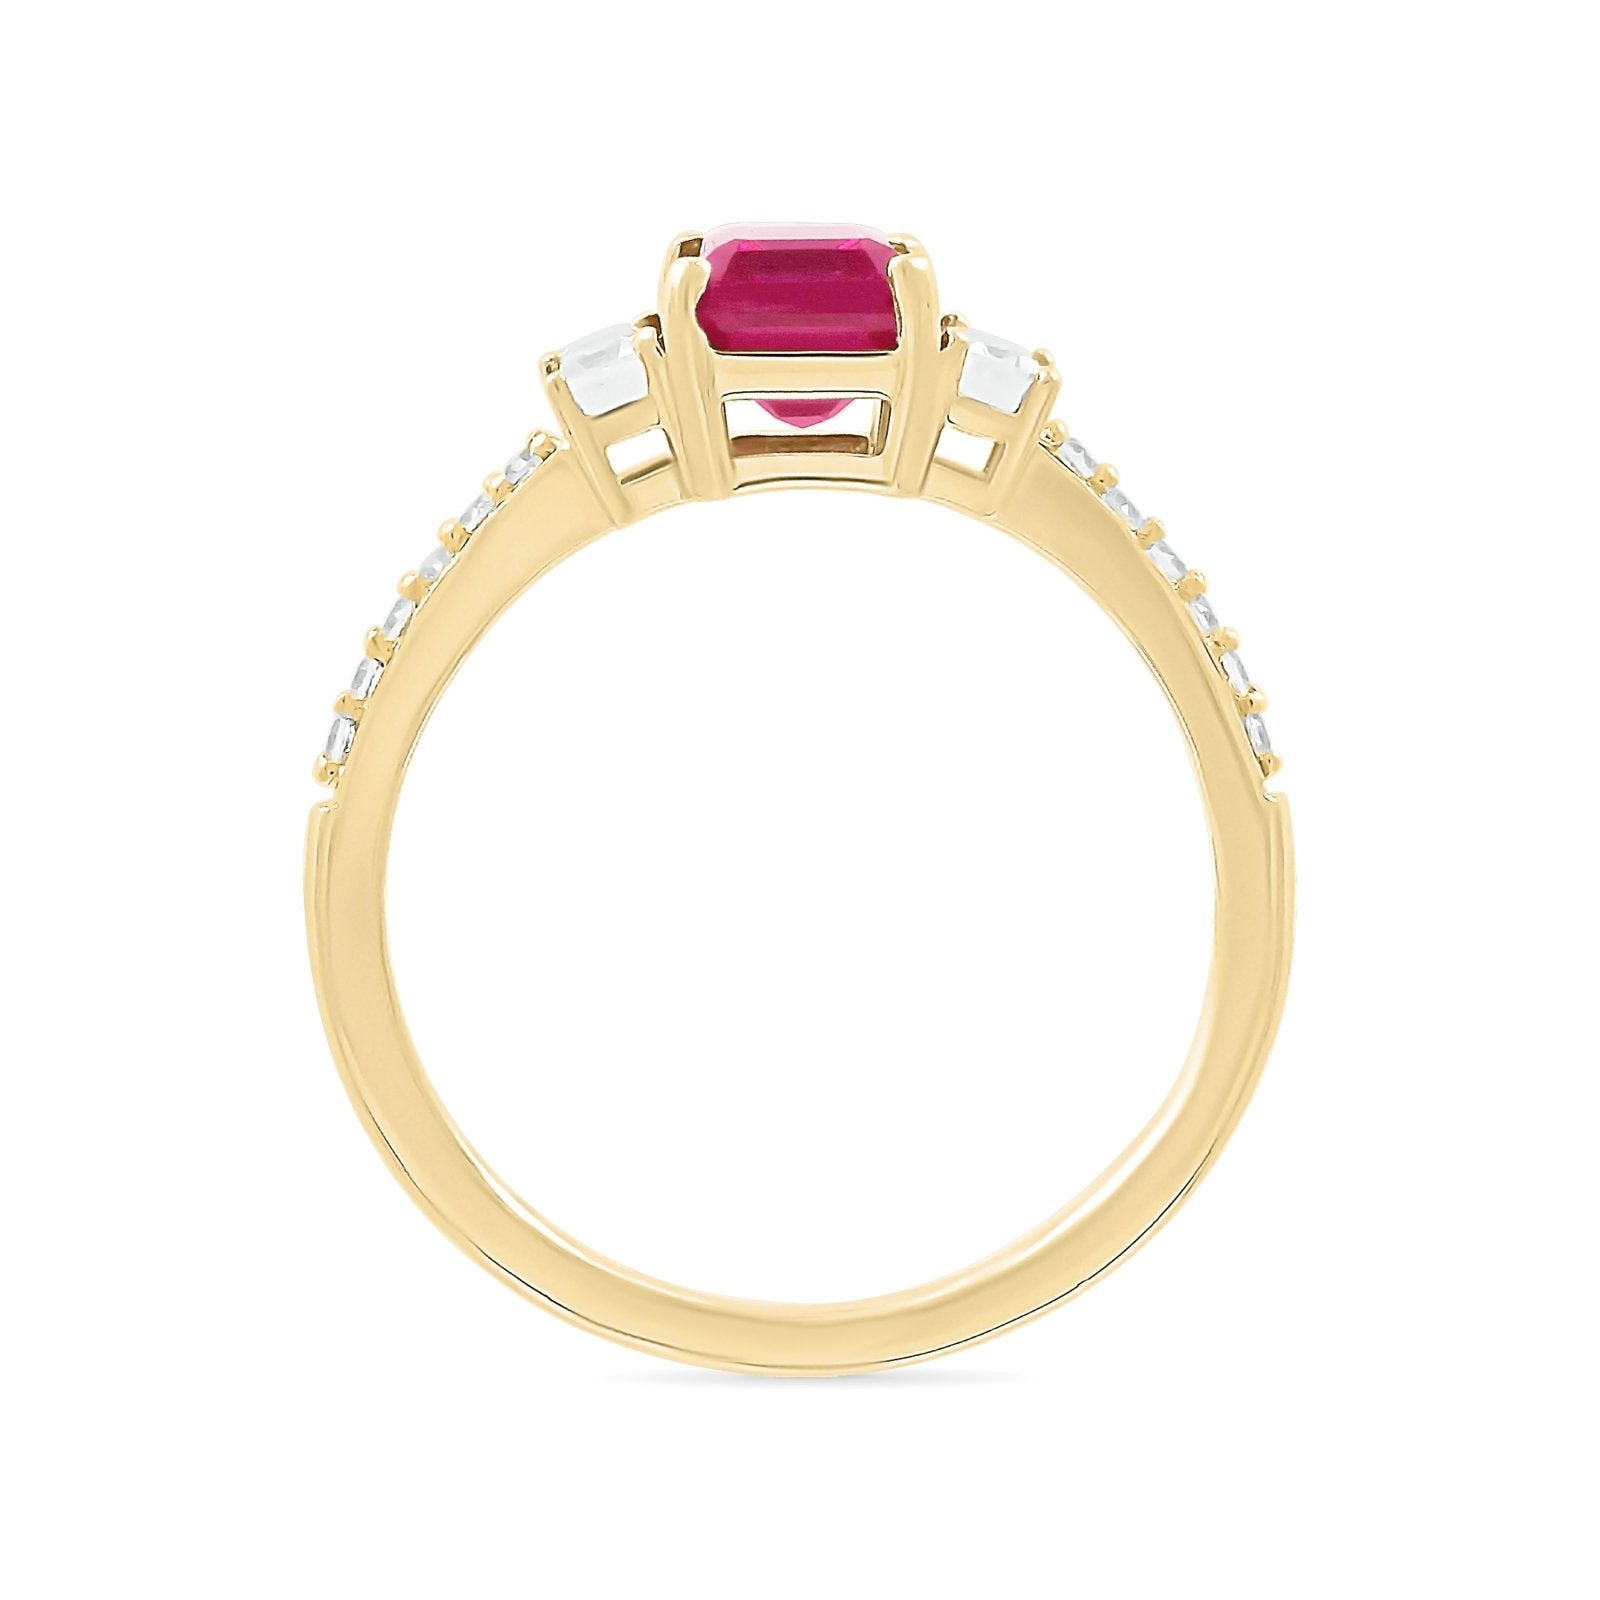 Three Stone Emerald Cut Ruby Ring with White Sapphire Band Rings Estella Collection #product_description# 32749 Made to Order Ruby White Sapphire #tag4# #tag5# #tag6# #tag7# #tag8# #tag9# #tag10#